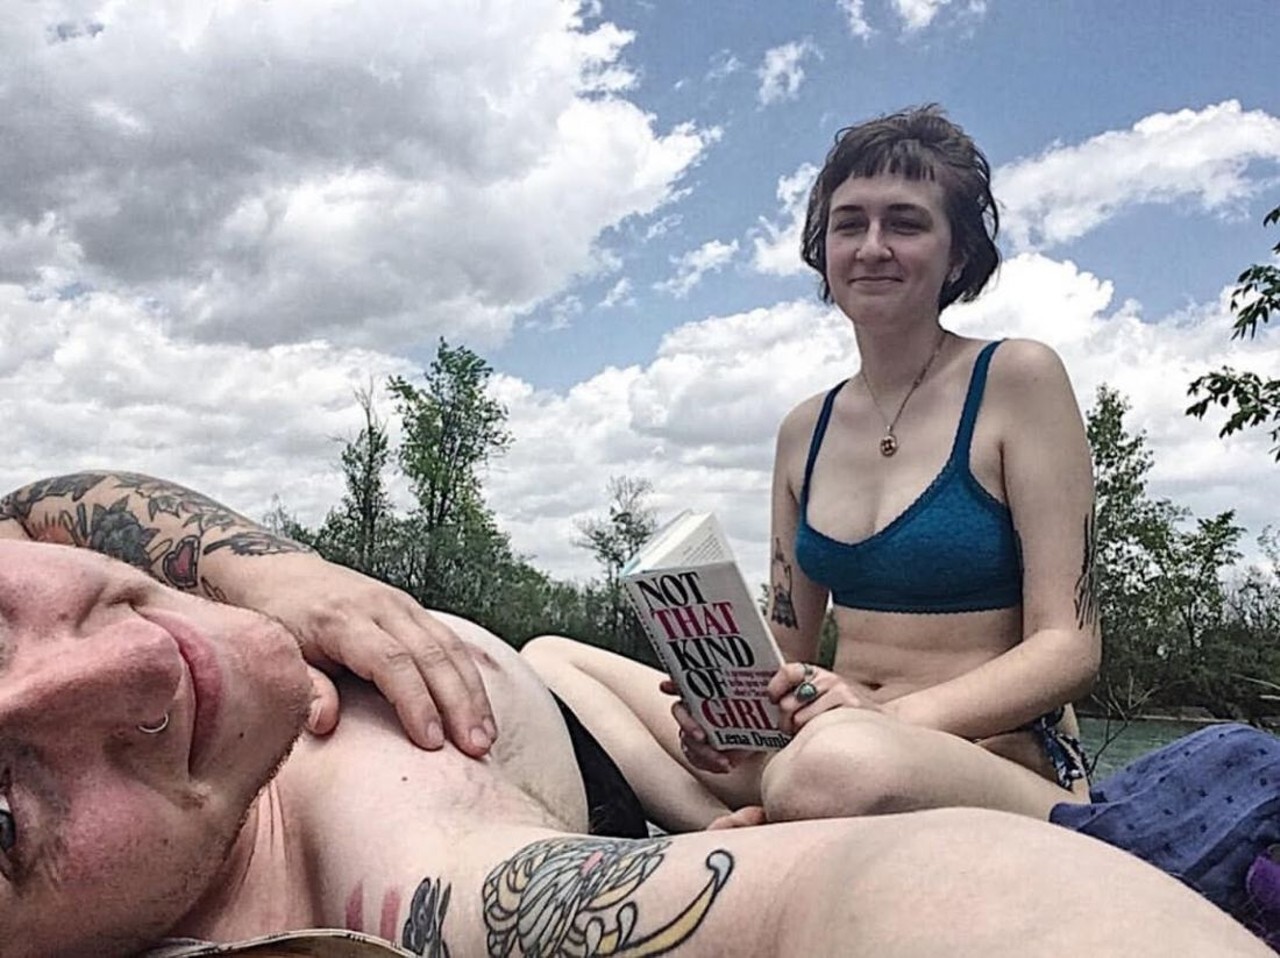 Hipster Beach 
This "secret beach" on Belle Isle is a beloved destination for the hip young folks who call Detroit home. Snap a selfie here to prove you belong to a super cool social group. 
Photo via Instagram, whskeybreth 